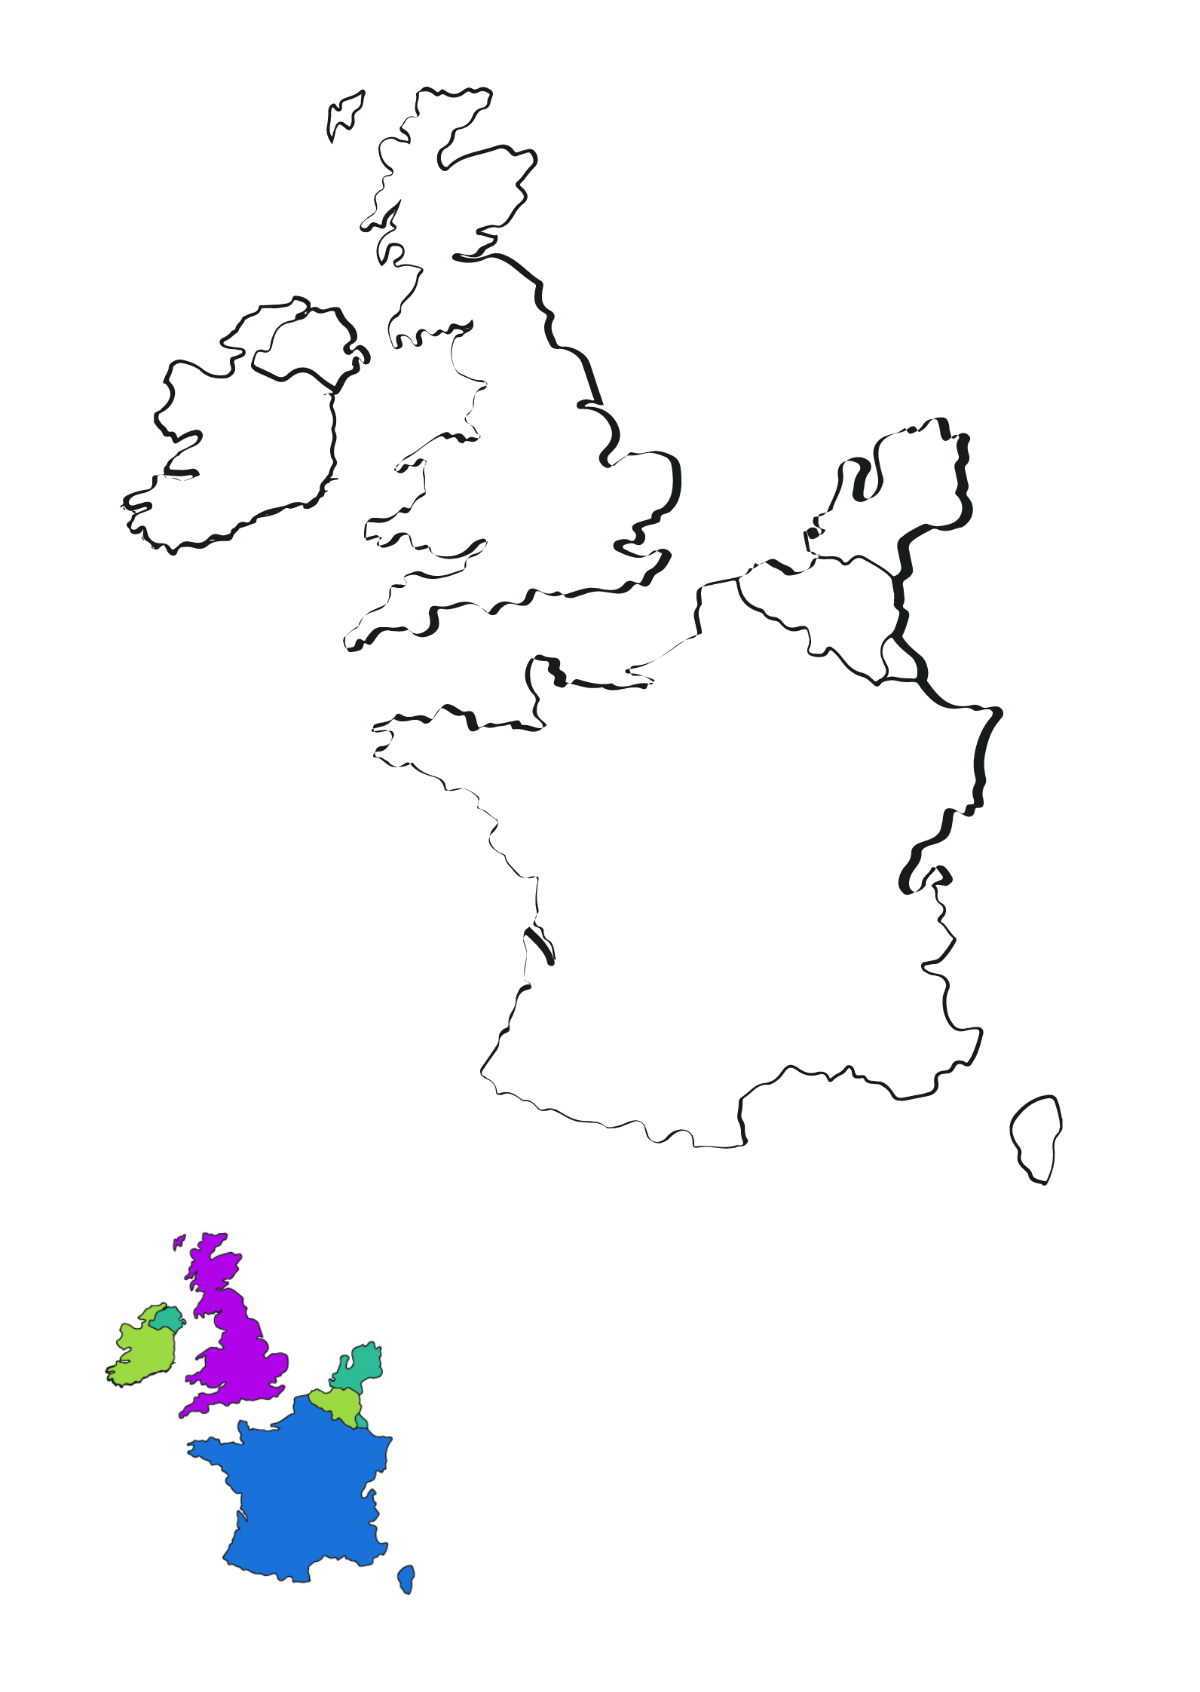 West Europe Map Coloring Page Template